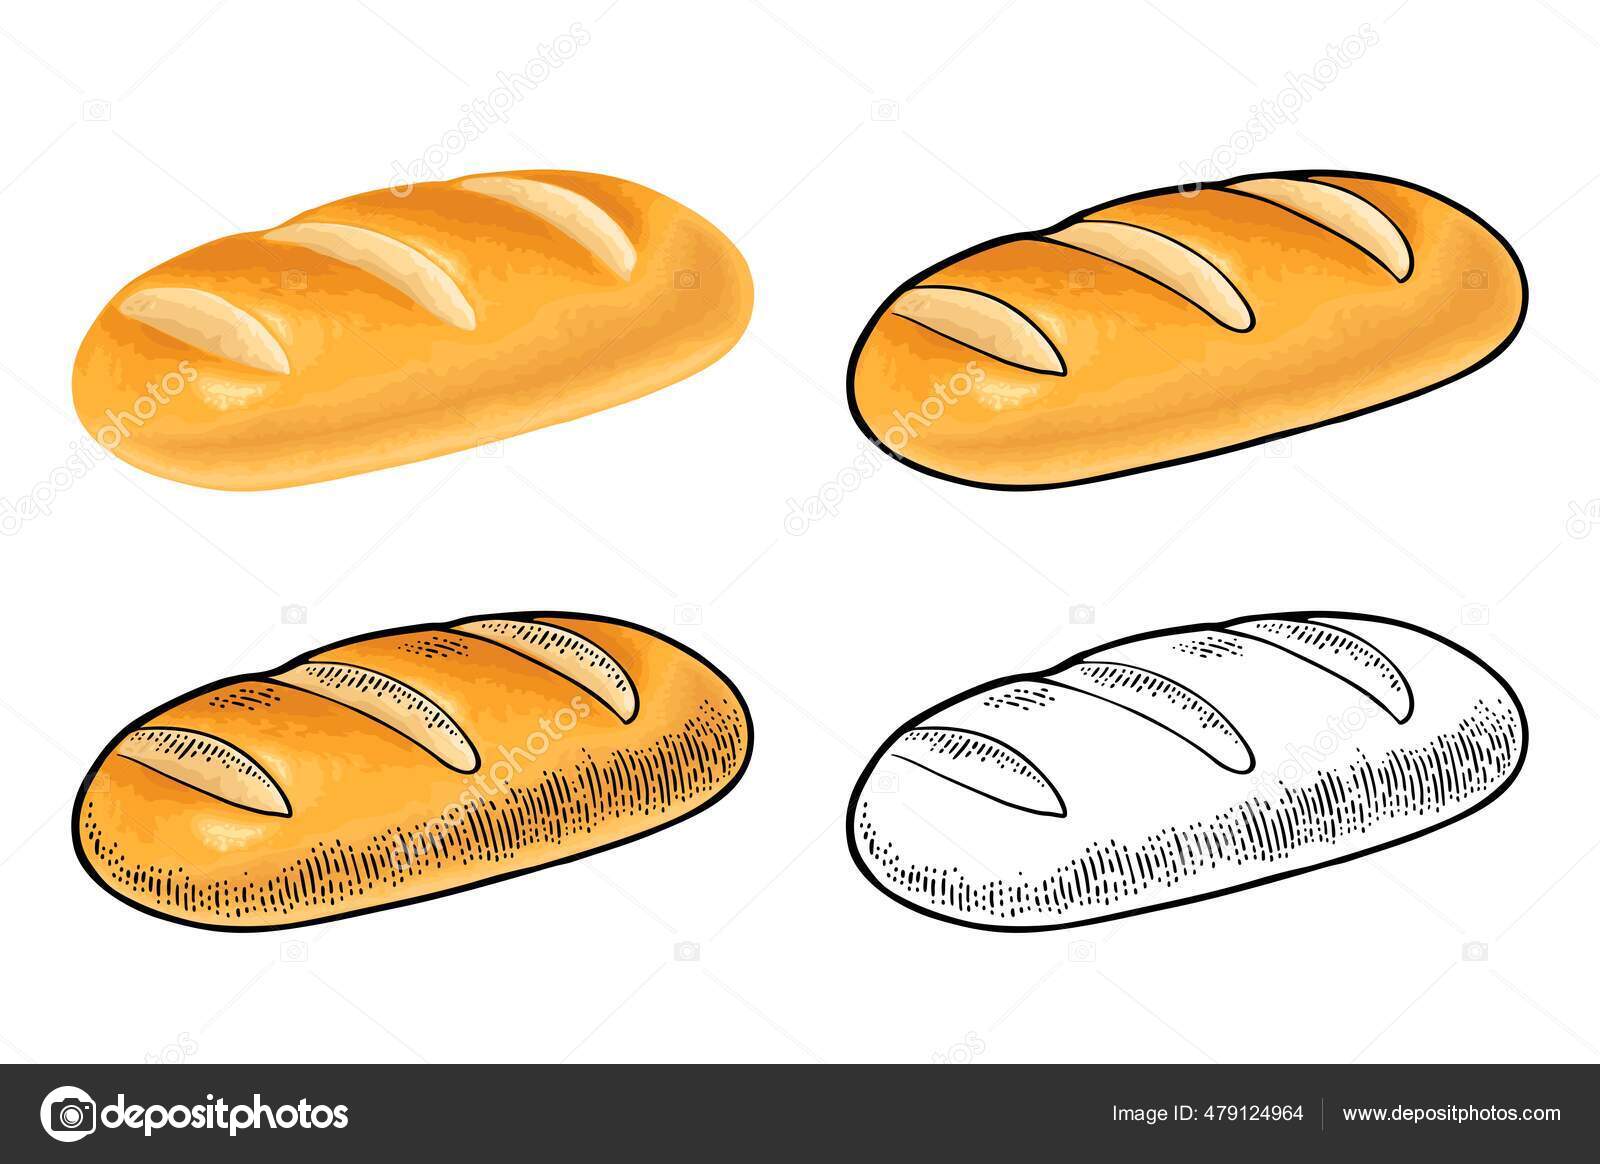 How to Draw Bread - Easy Drawing Tutorial For Kids